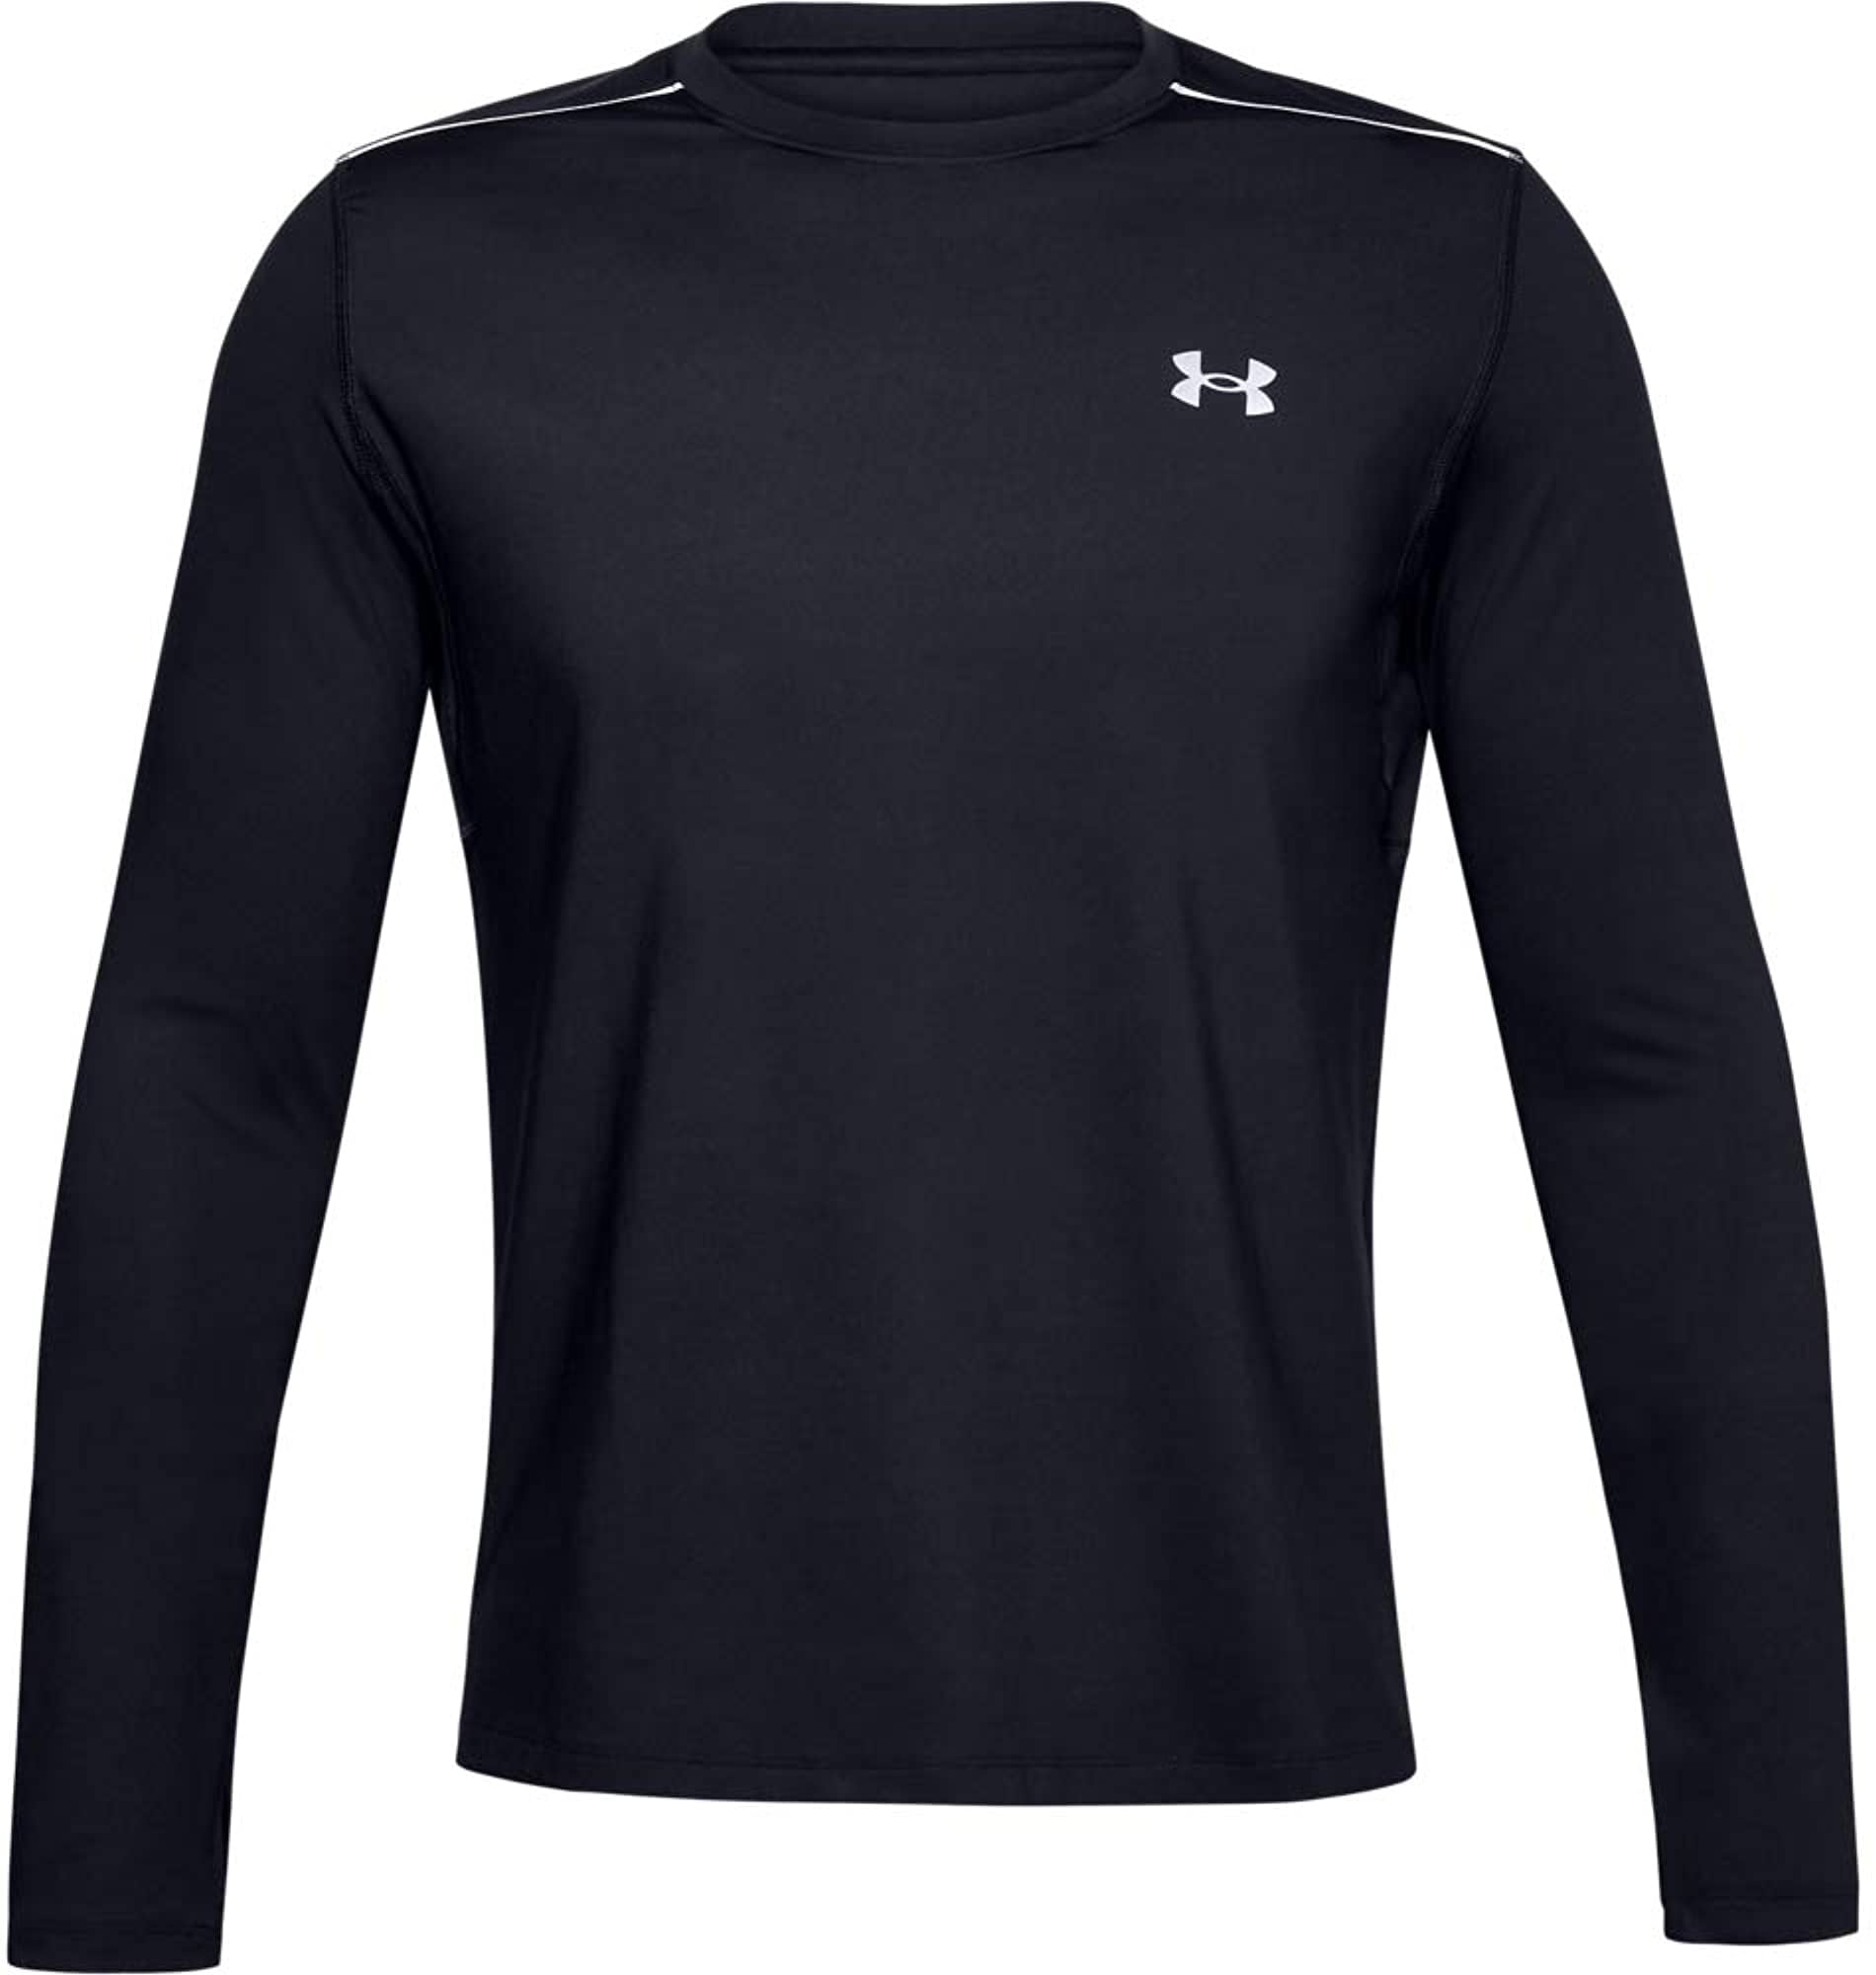 Under Armour Mens Empowered Long-Sleeves Crew | Walmart Canada